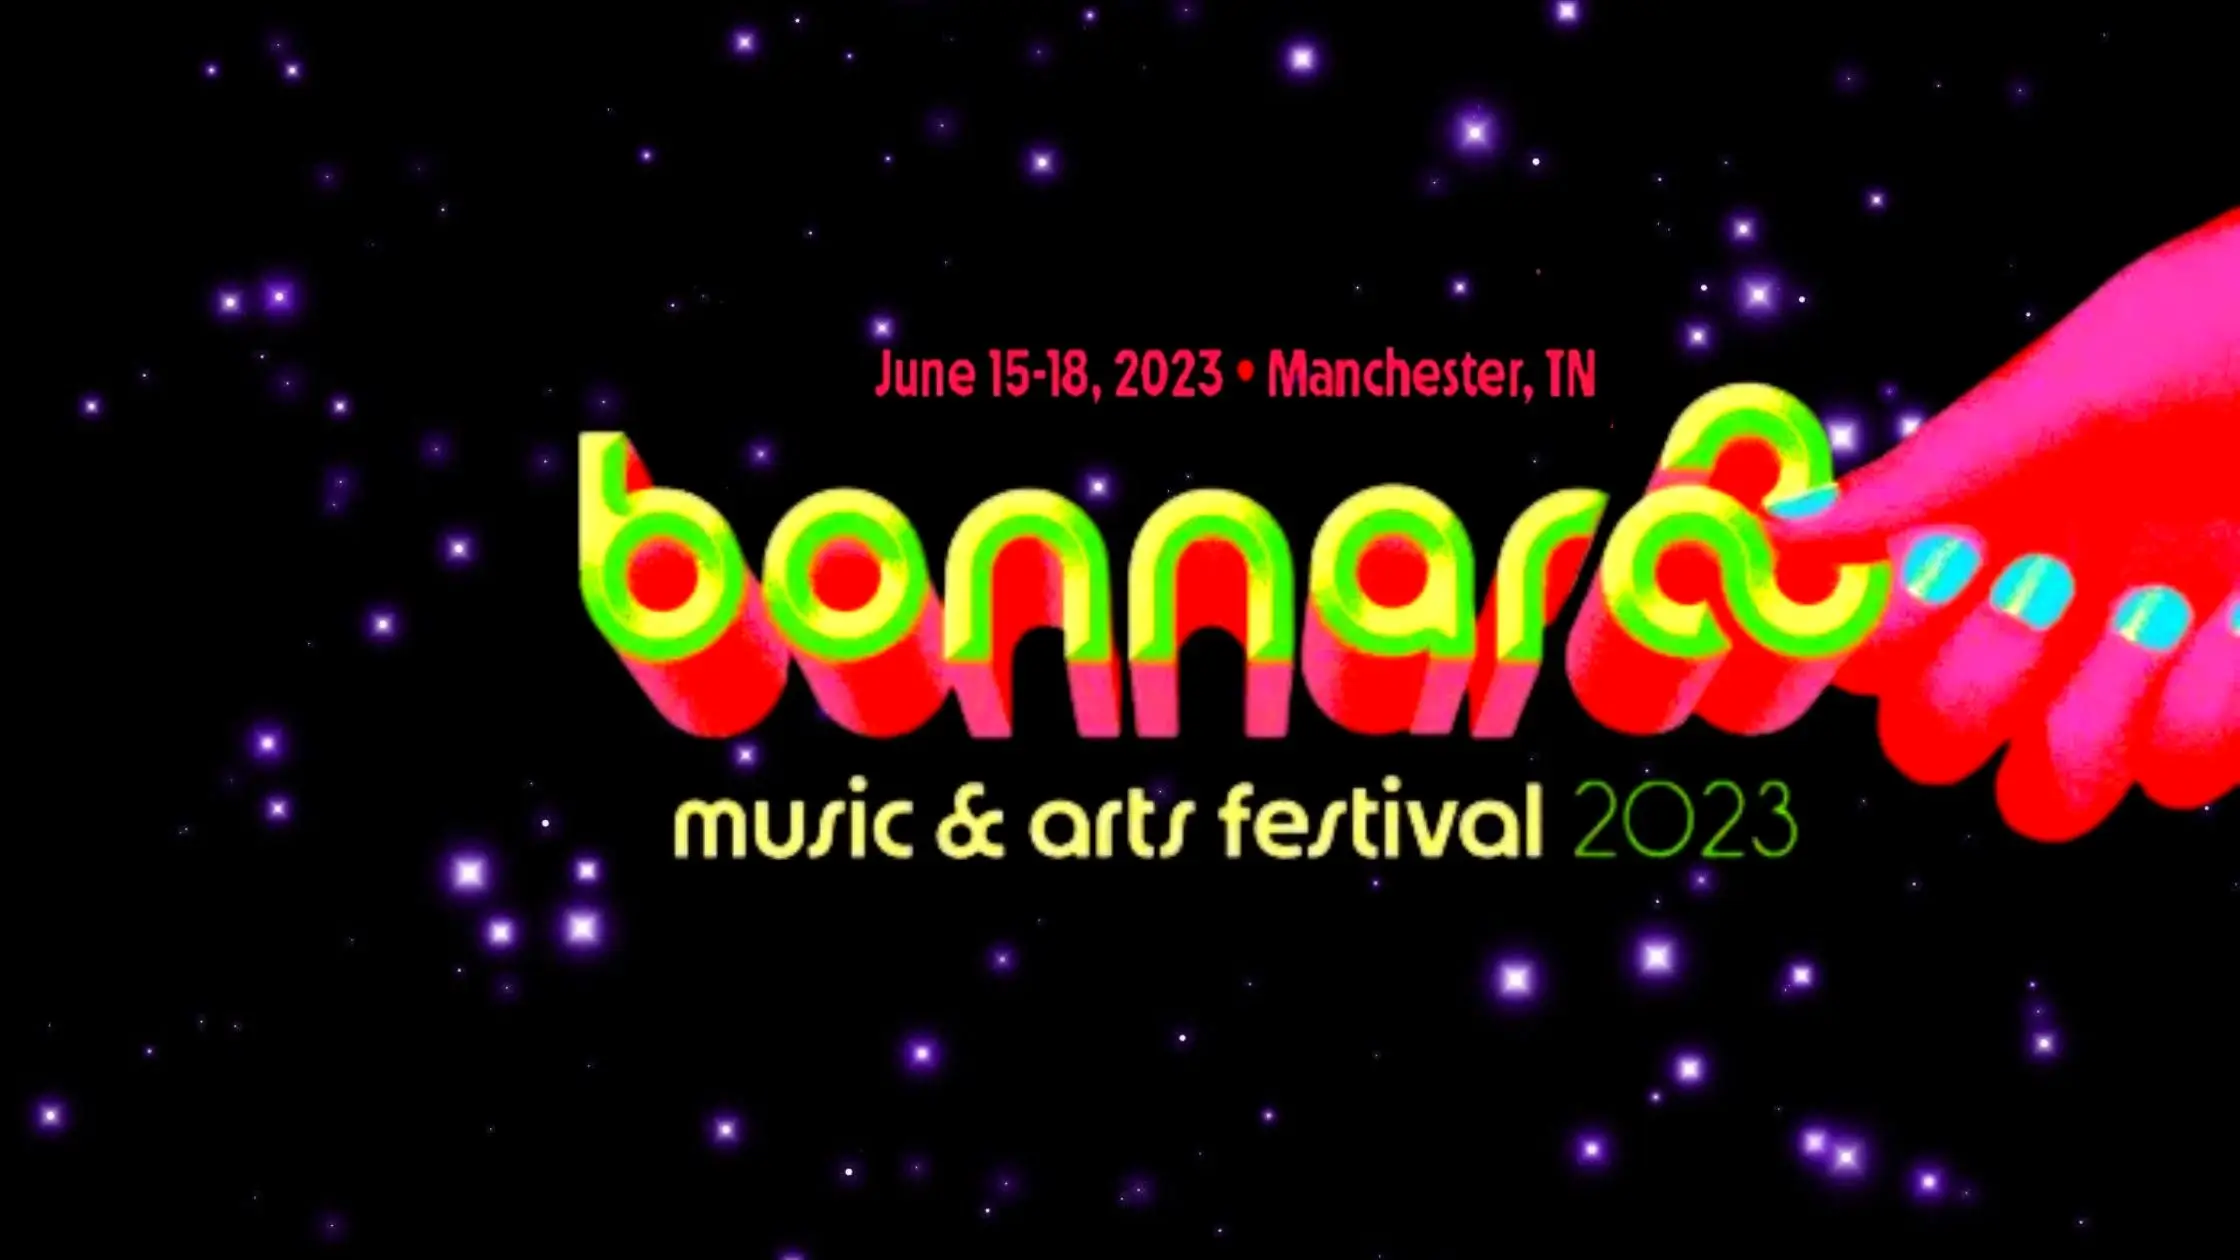 Bonnaroo 2023 Lineup Announced Checkout Ticket Prices, Dates, Performances, And More